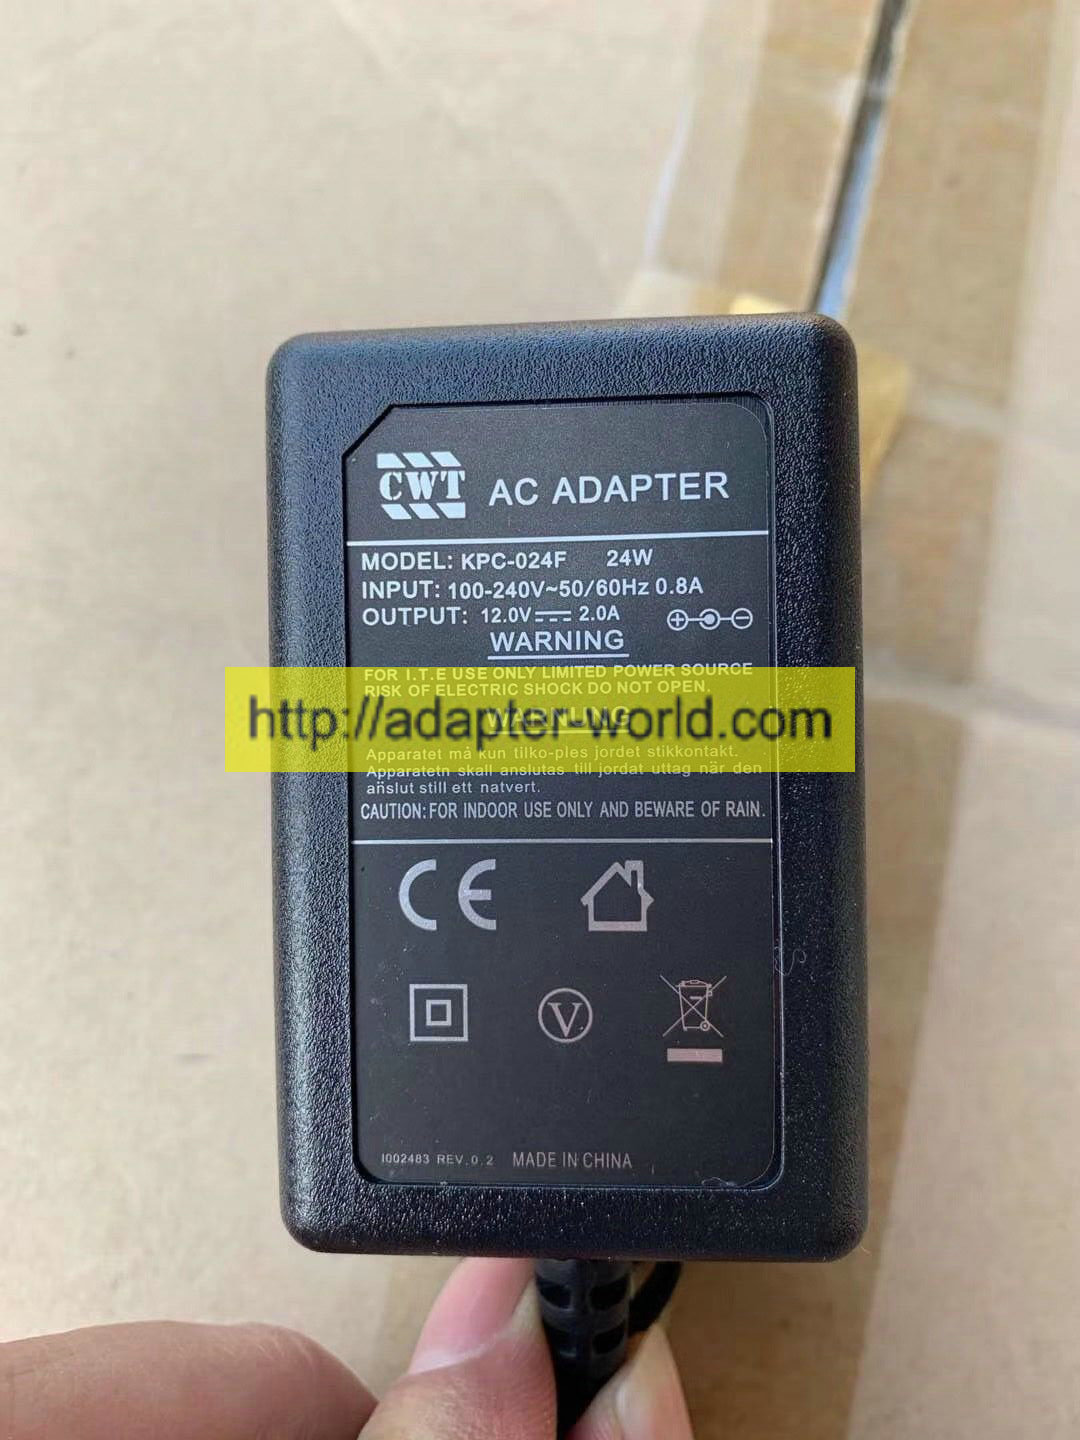 *100% Brand NEW* CWT 12.0V---2.0A KPC-024F 24W AC Adapter Free shipping!